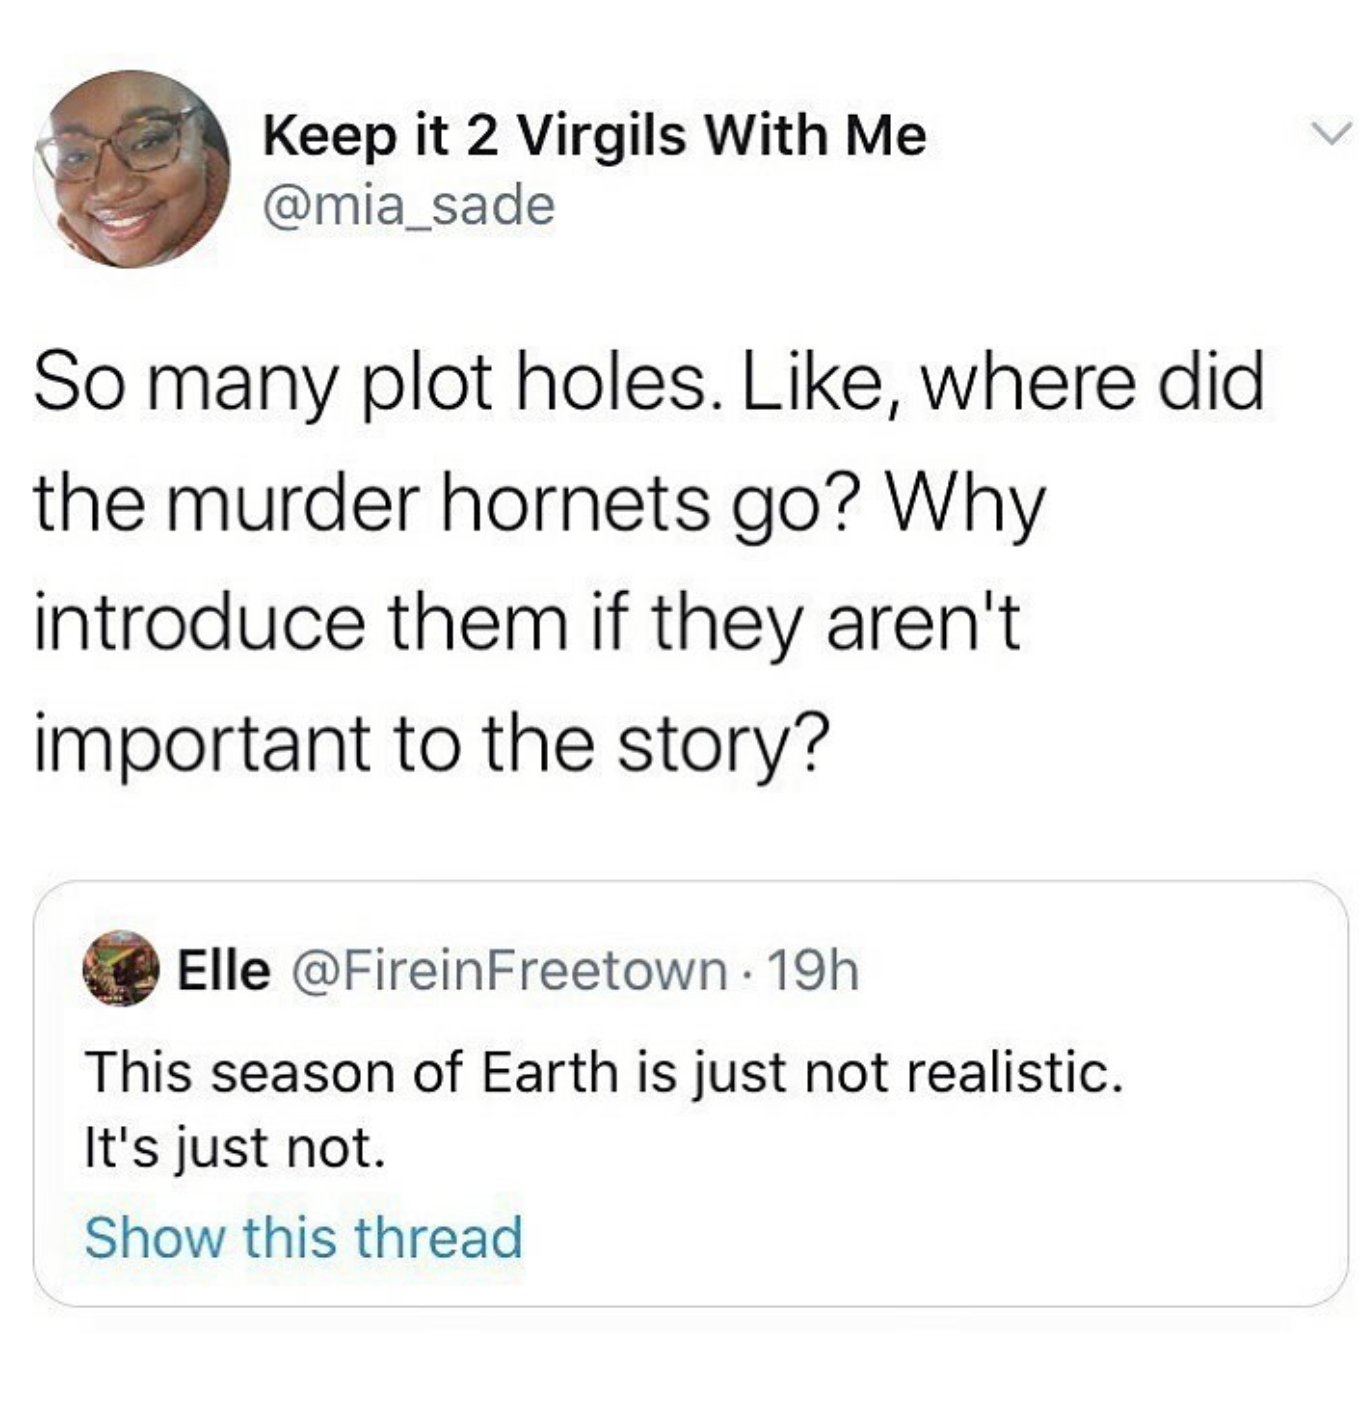 good bean jokes - Keep it 2 Virgils With Me So many plot holes. , where did the murder hornets go? Why introduce them if they aren't important to the story? Elle 19h This season of Earth is just not realistic. It's just not. Show this thread